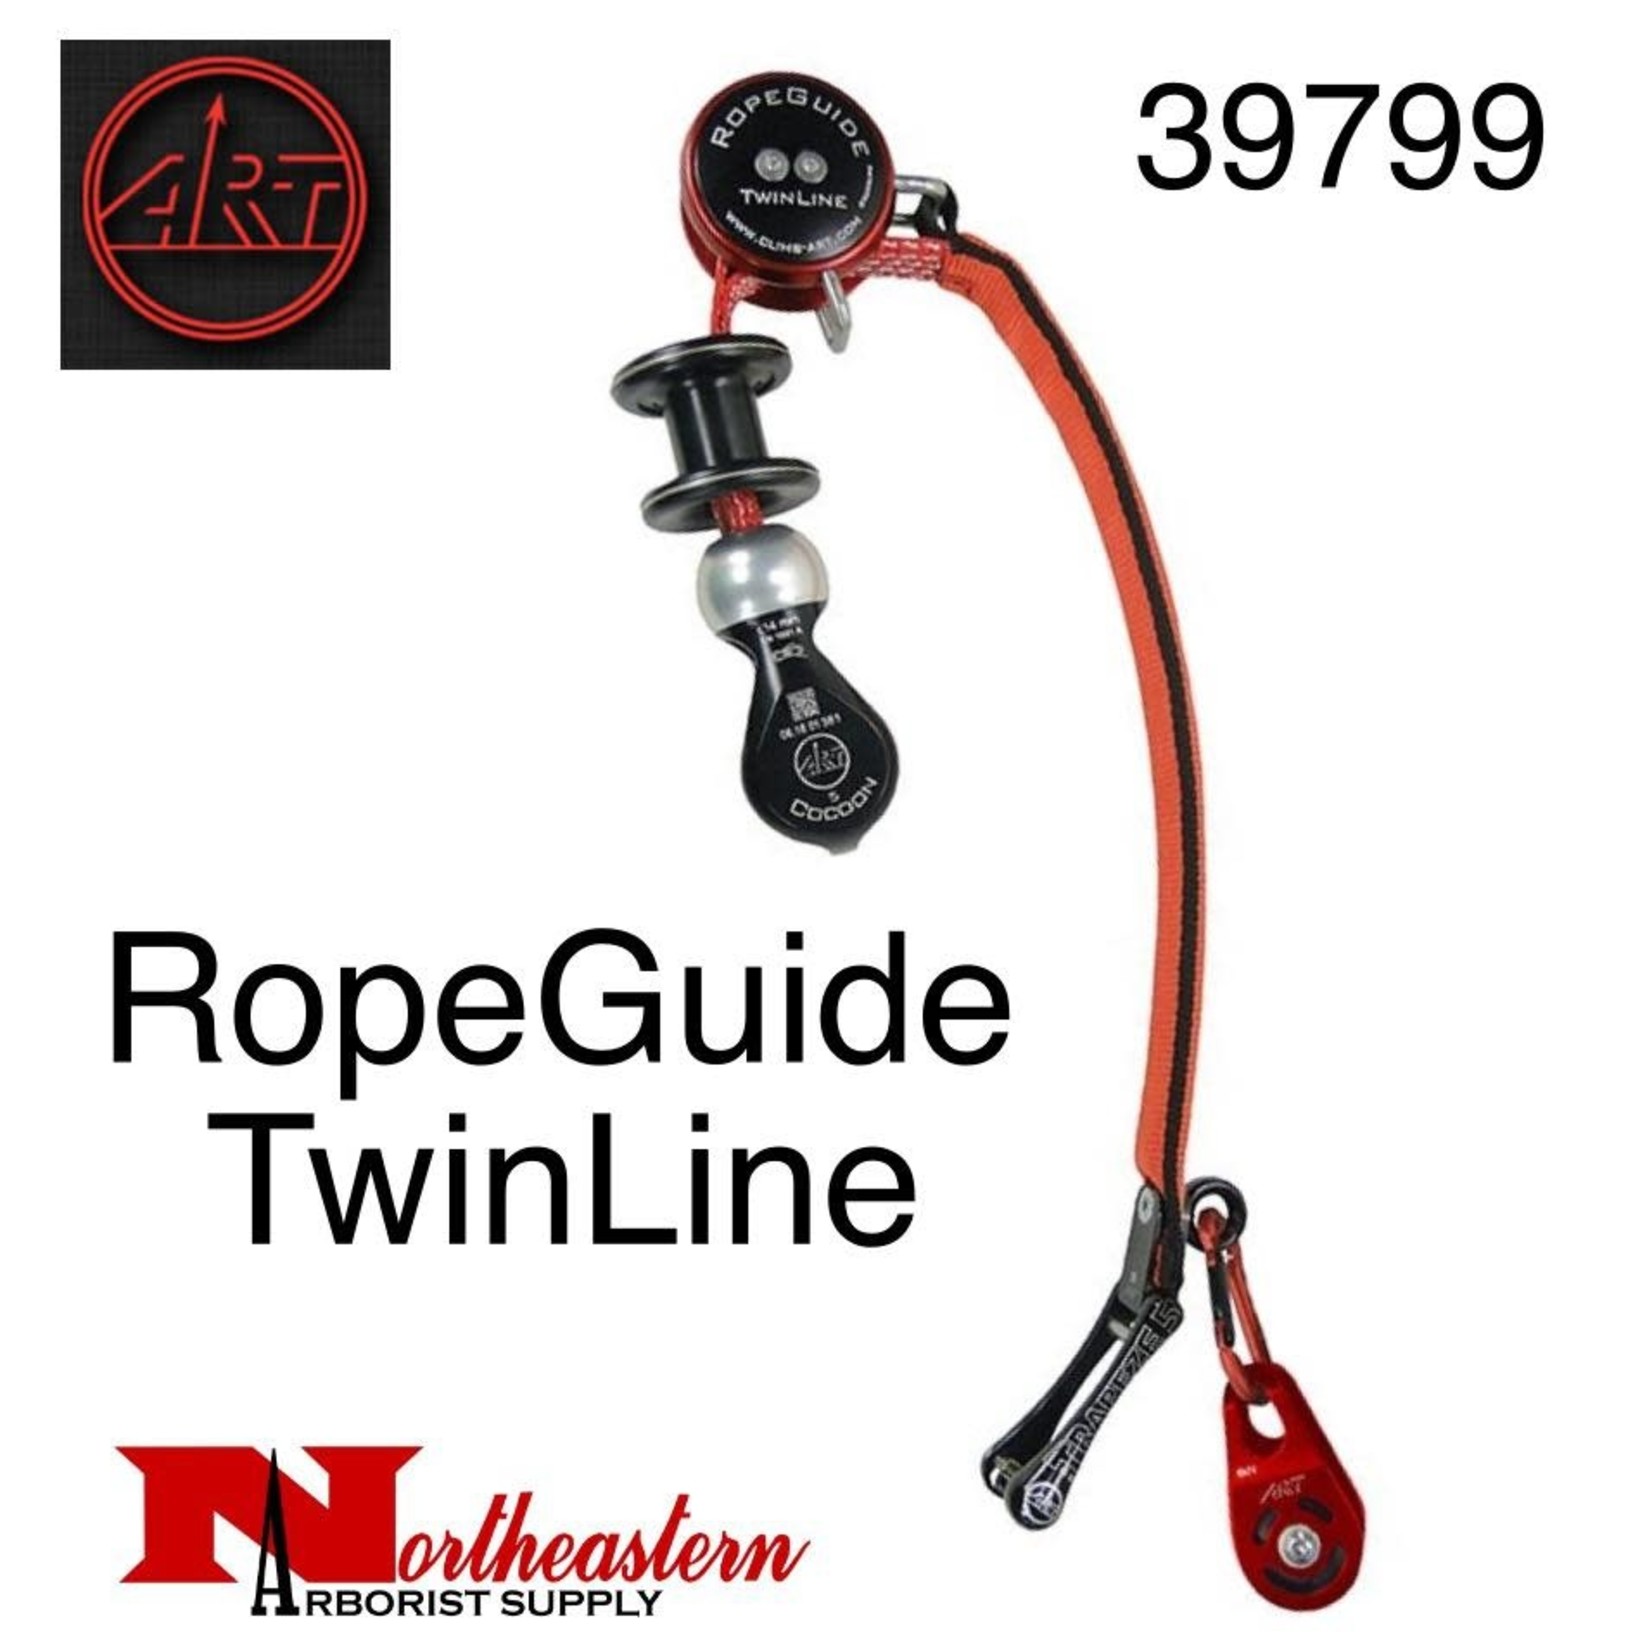 A.R.T. Art Ropeguide Twinline Friction Saver